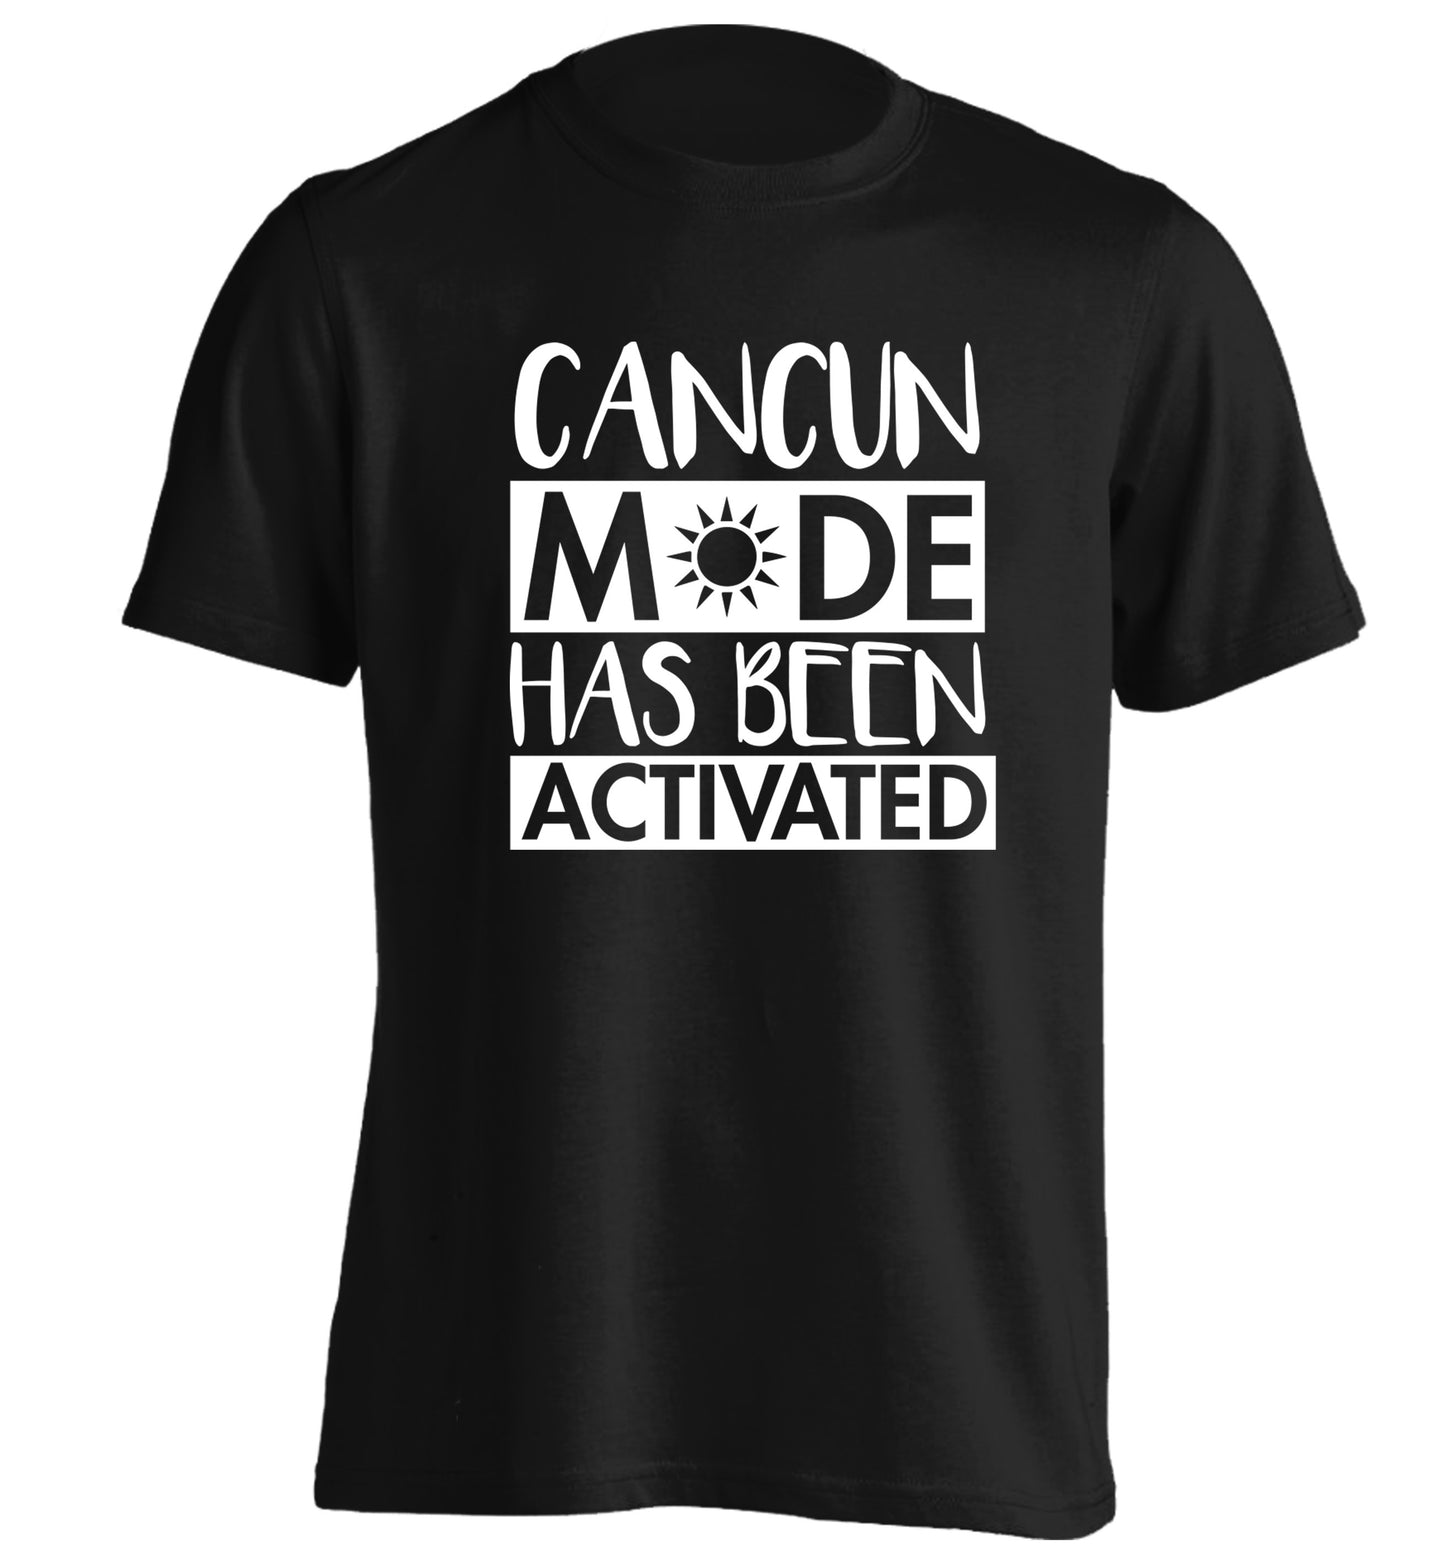 Cancun mode has been activated adults unisex black Tshirt 2XL